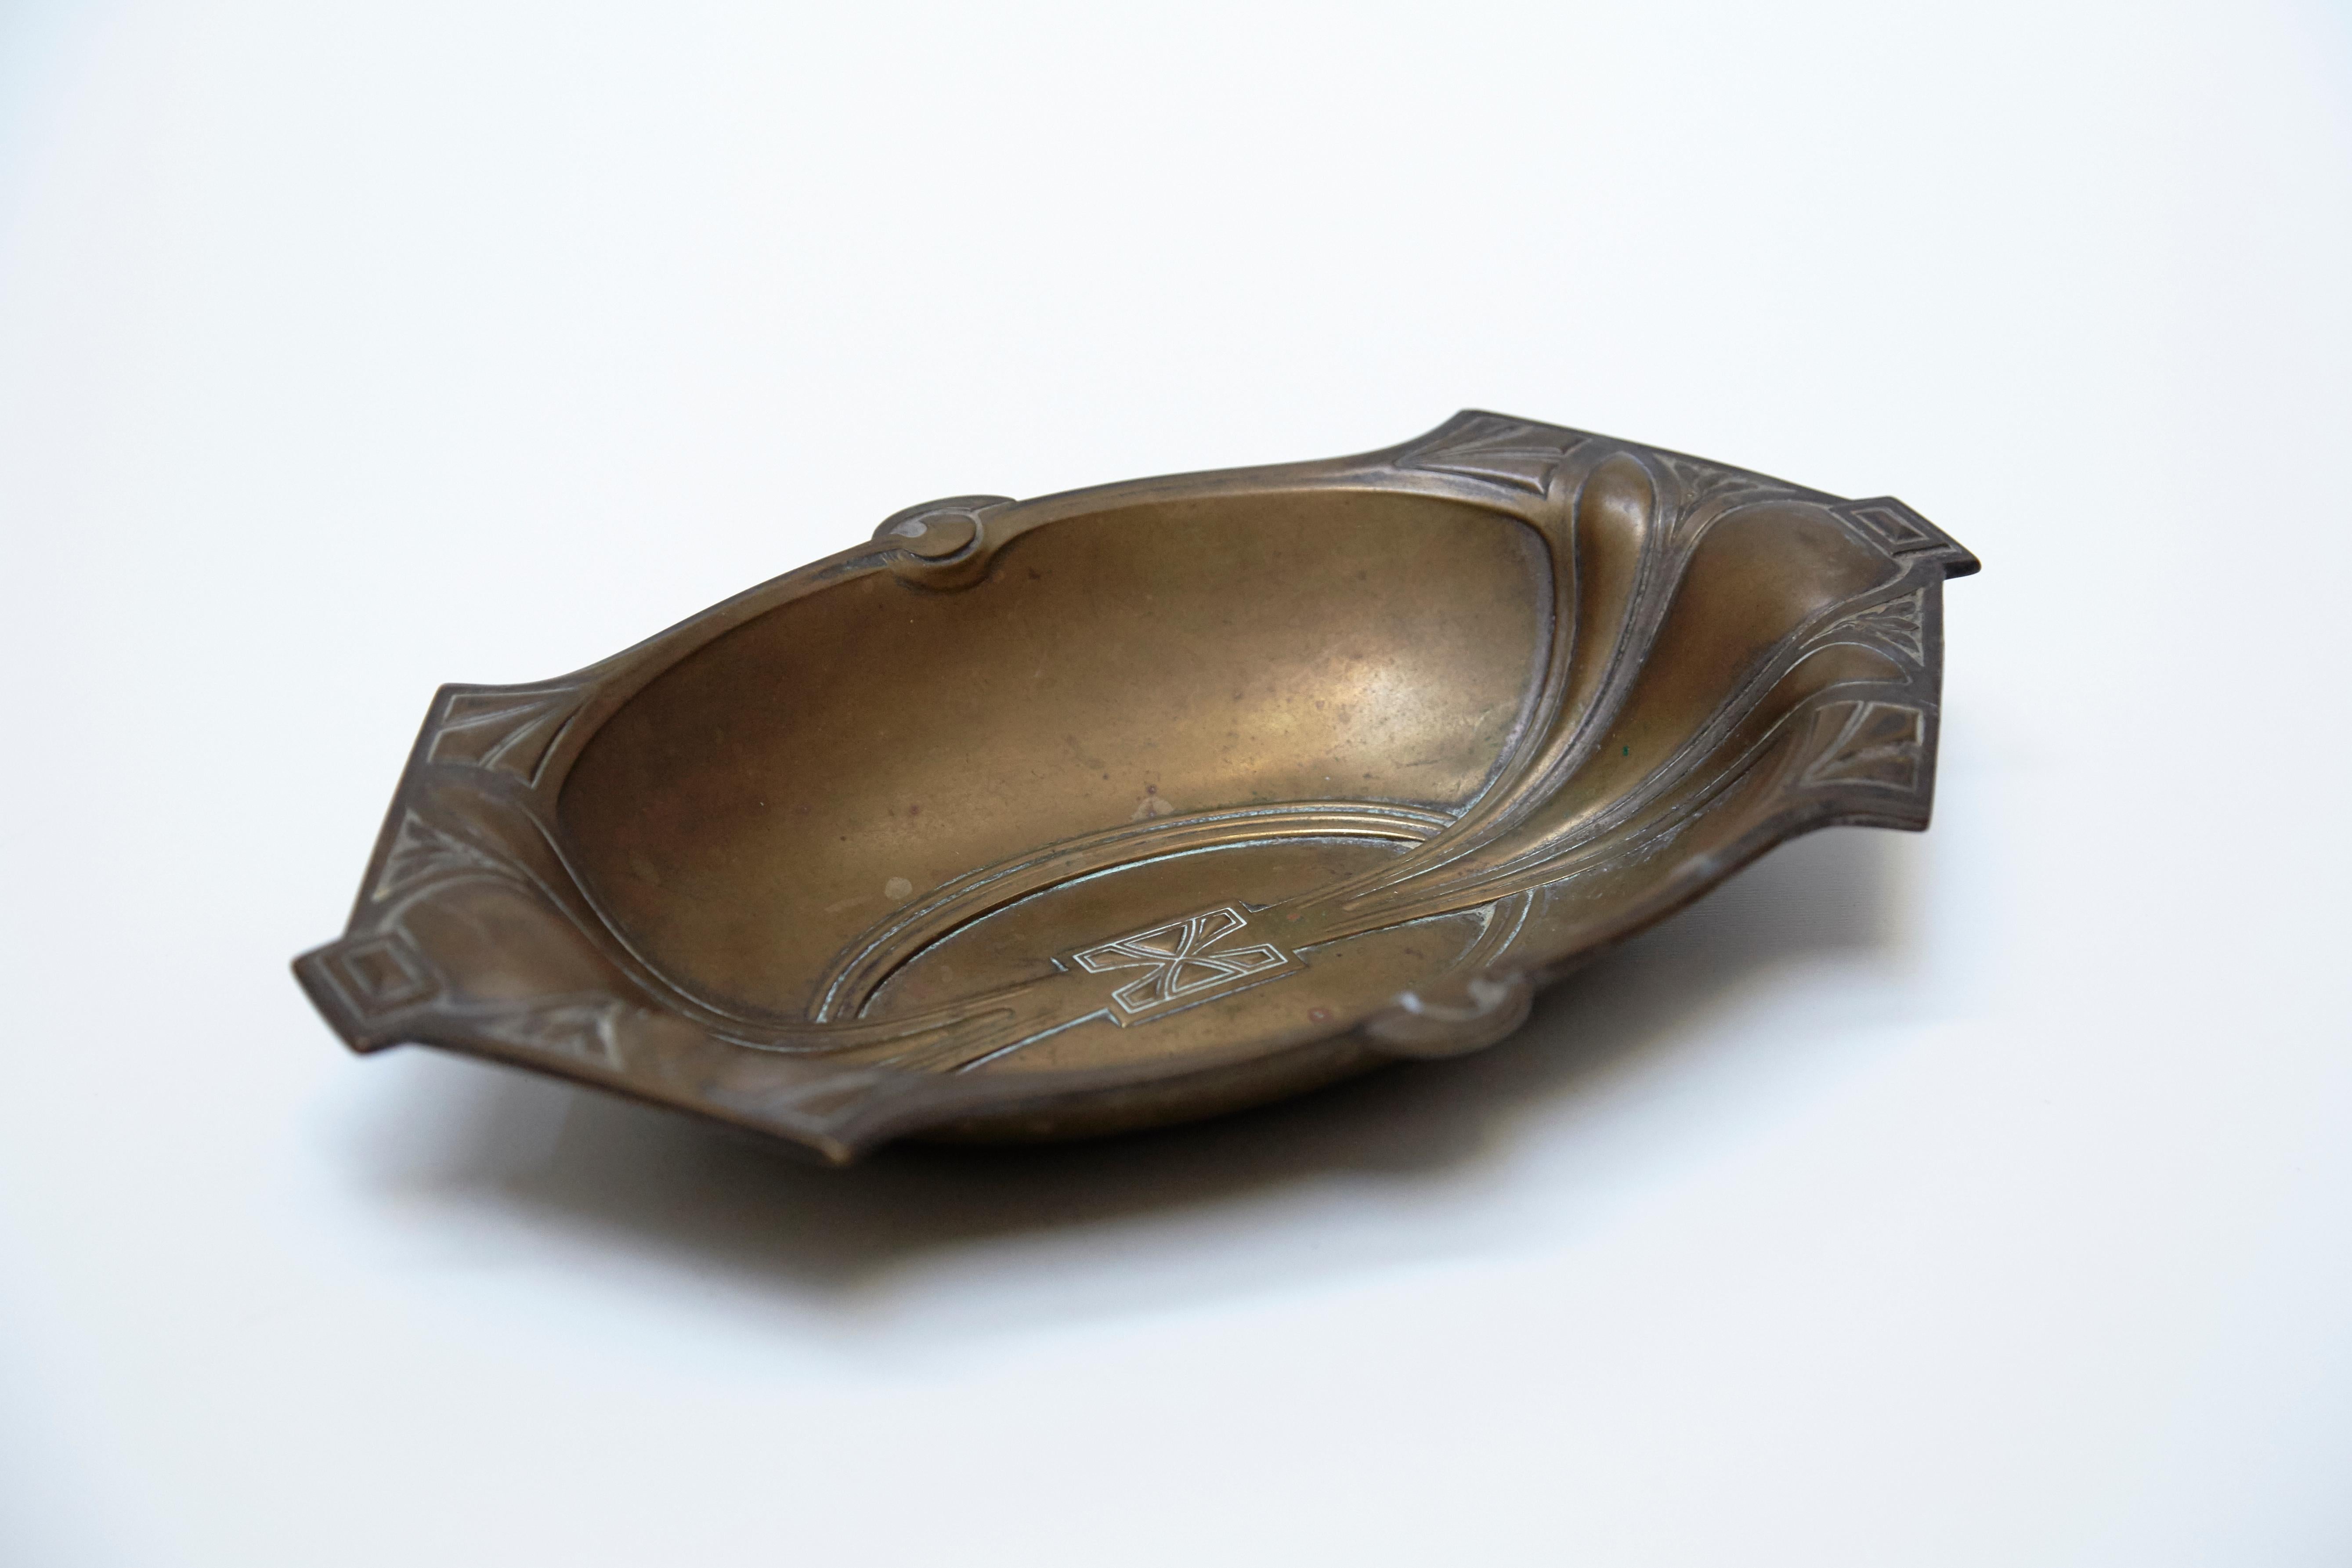 Catalan modernist copper tray.
Manufactured in Barcelona, circa 1920.

In original condition with minor wear consistent of age and use, preserving a beautiful patina.

Measures: 3.5 H x 25 x 15 cm.